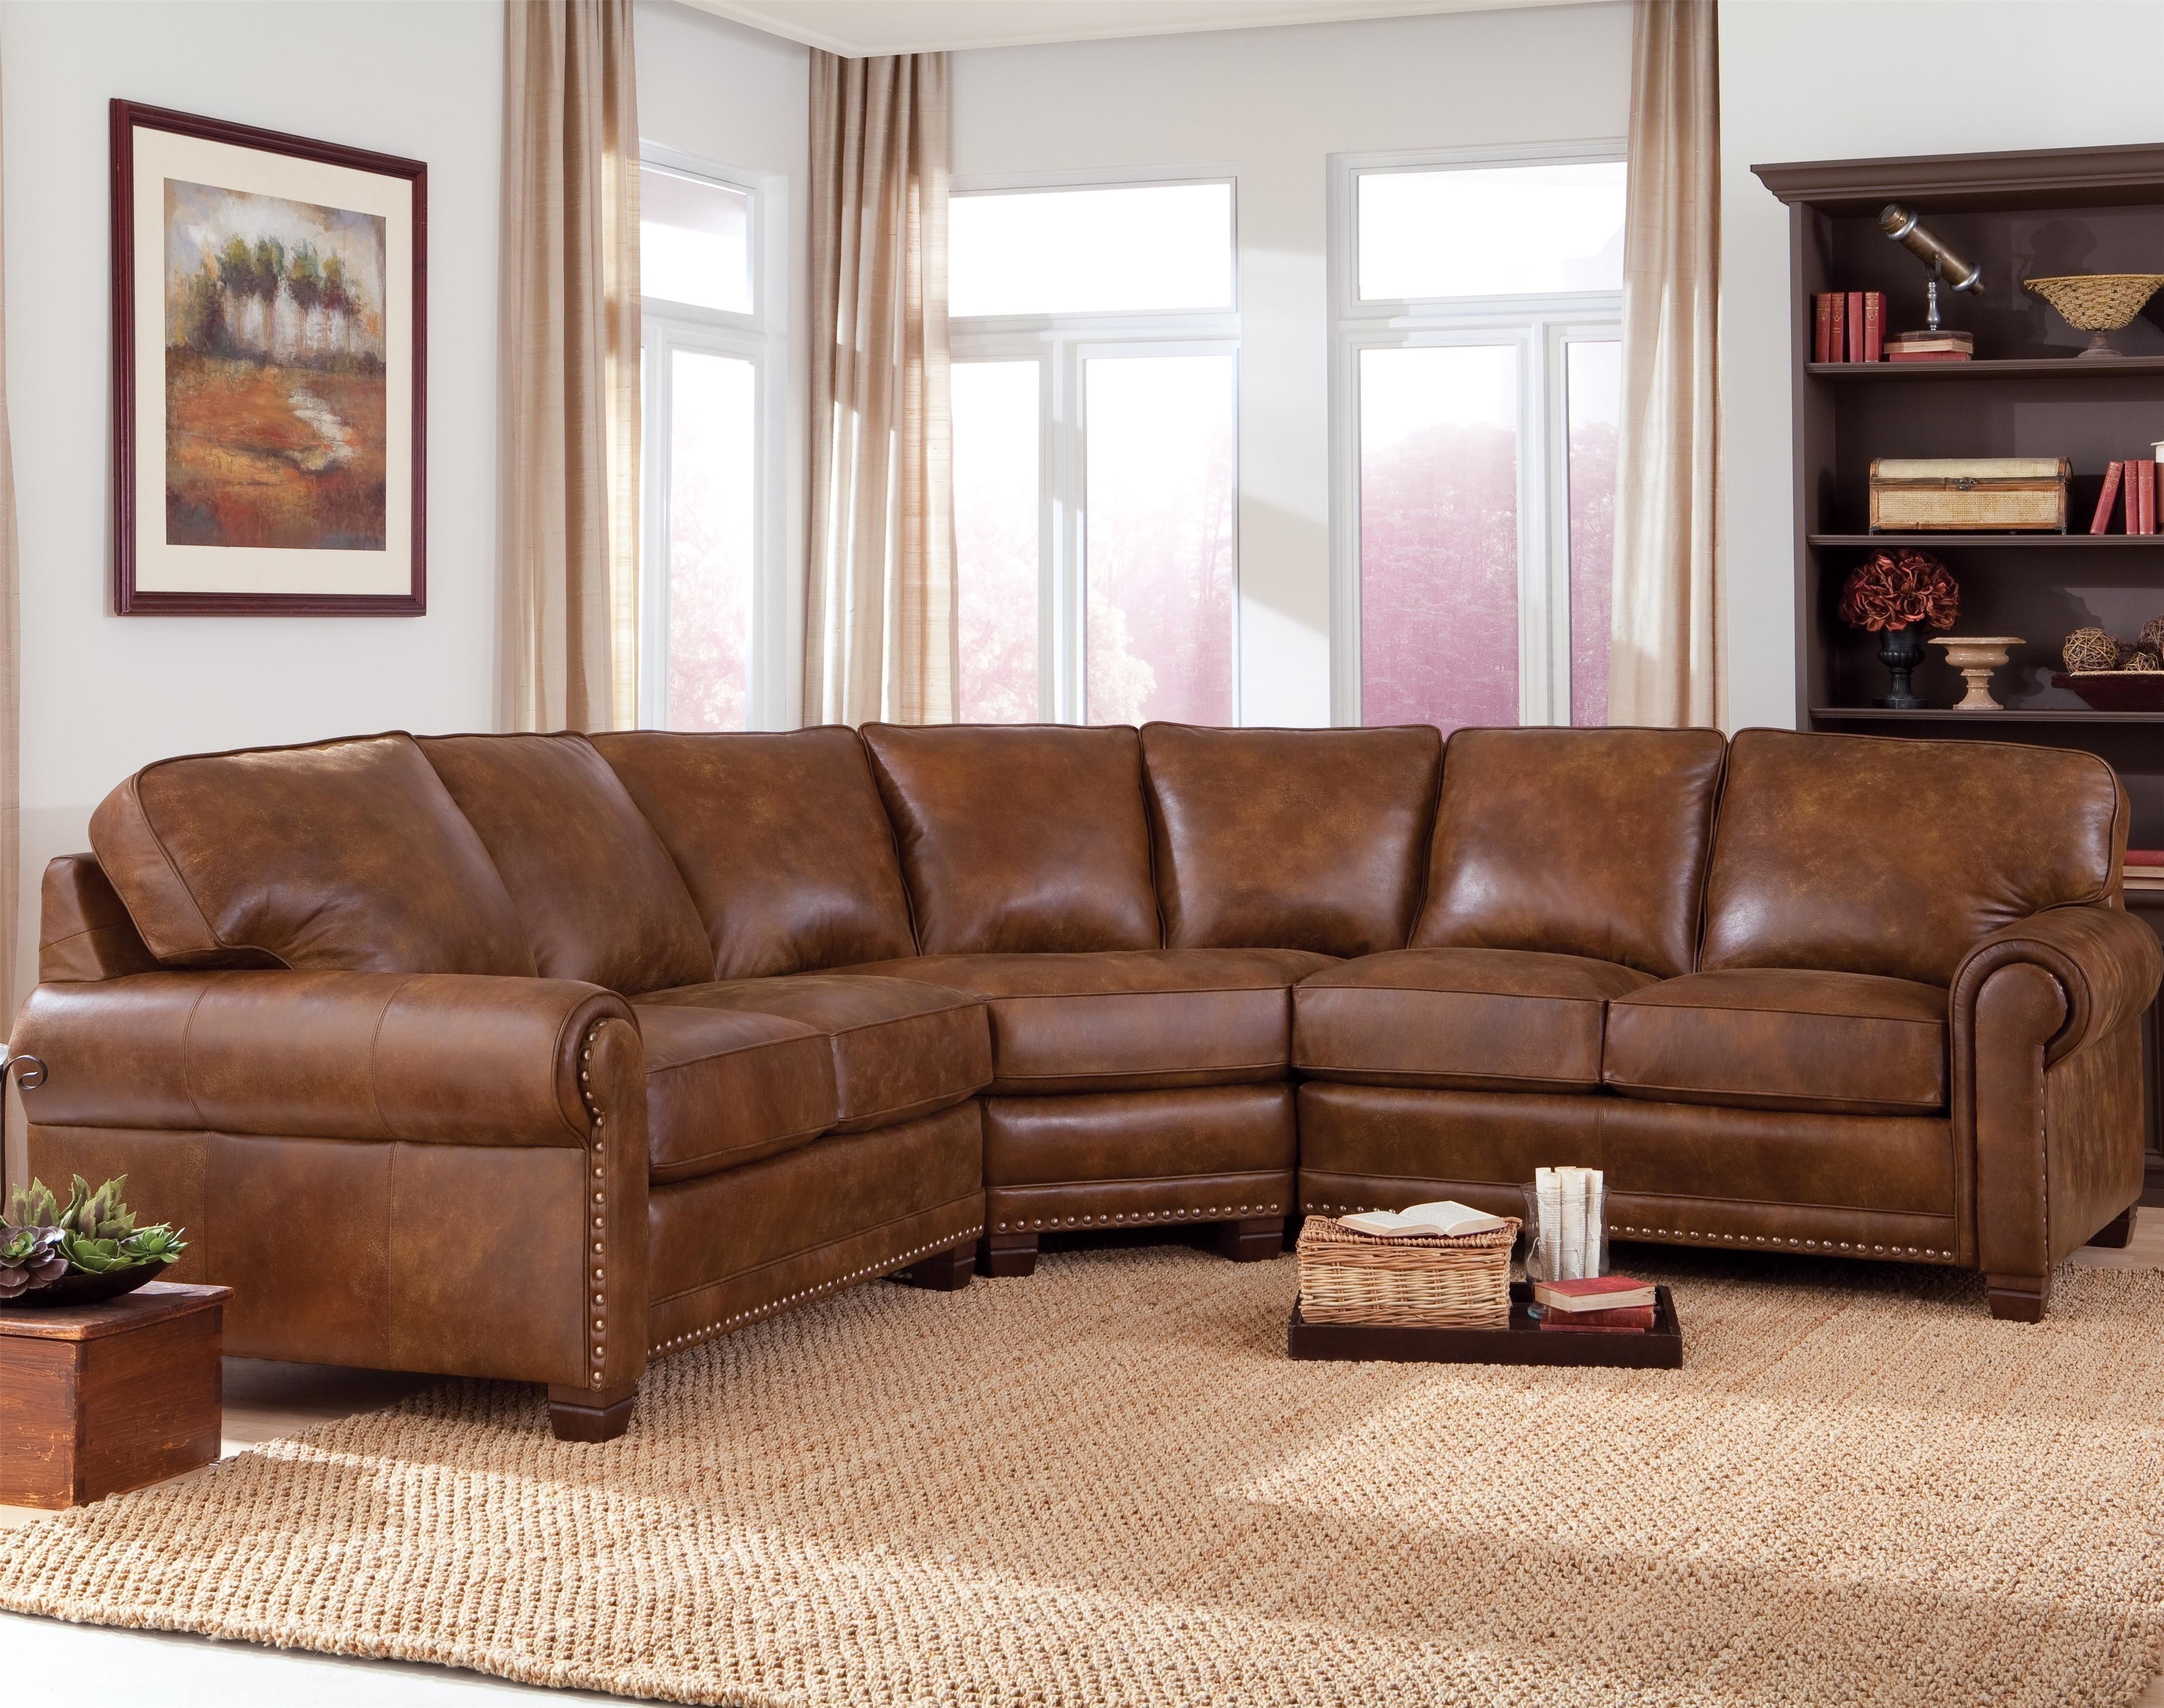 3 Piece Sectional Sofas For Small Spaces | Http://ml2r With Blaine 3 Piece Sectionals (View 7 of 25)